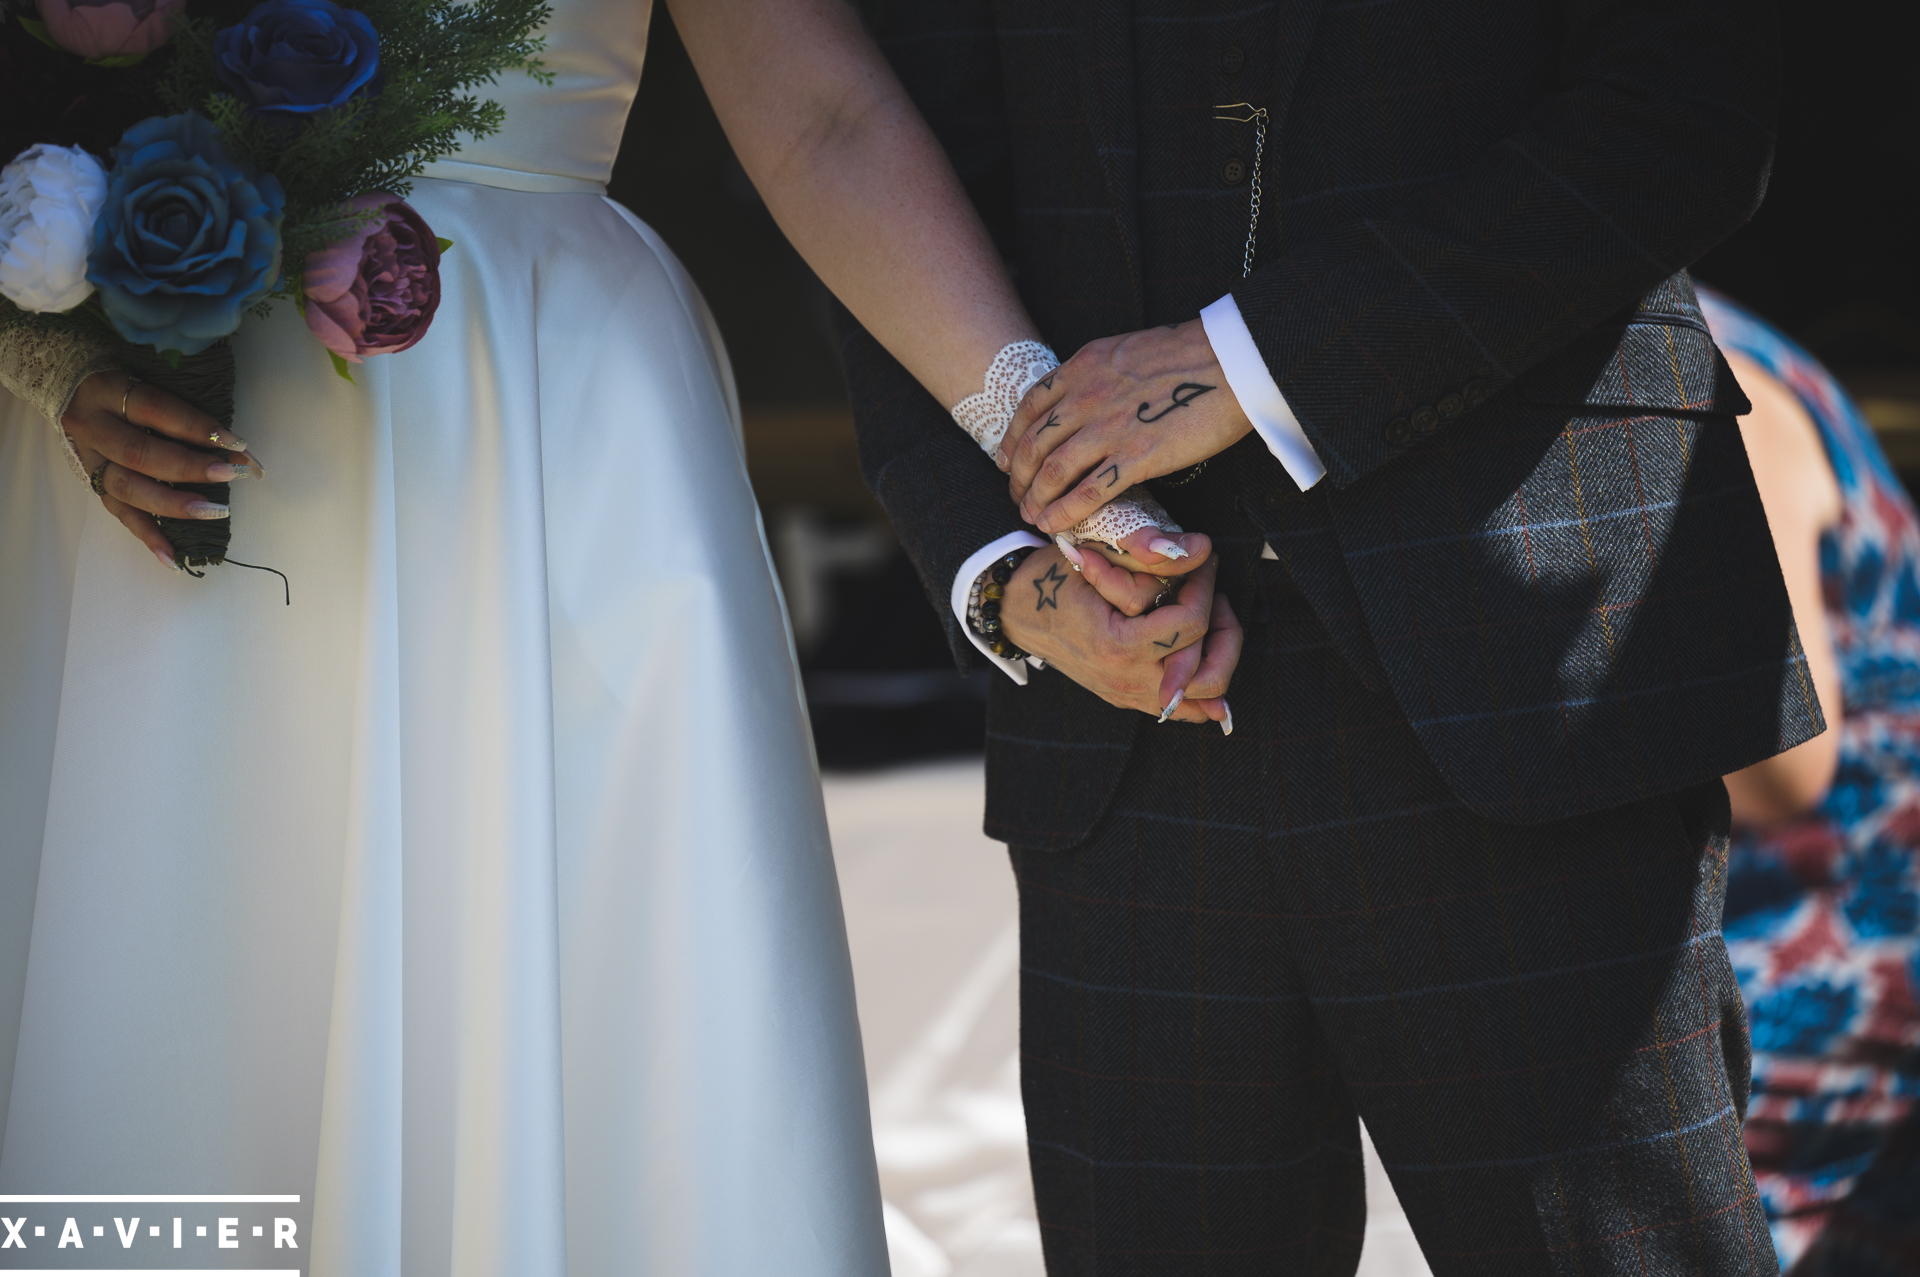 close up of bride and groom holding hands